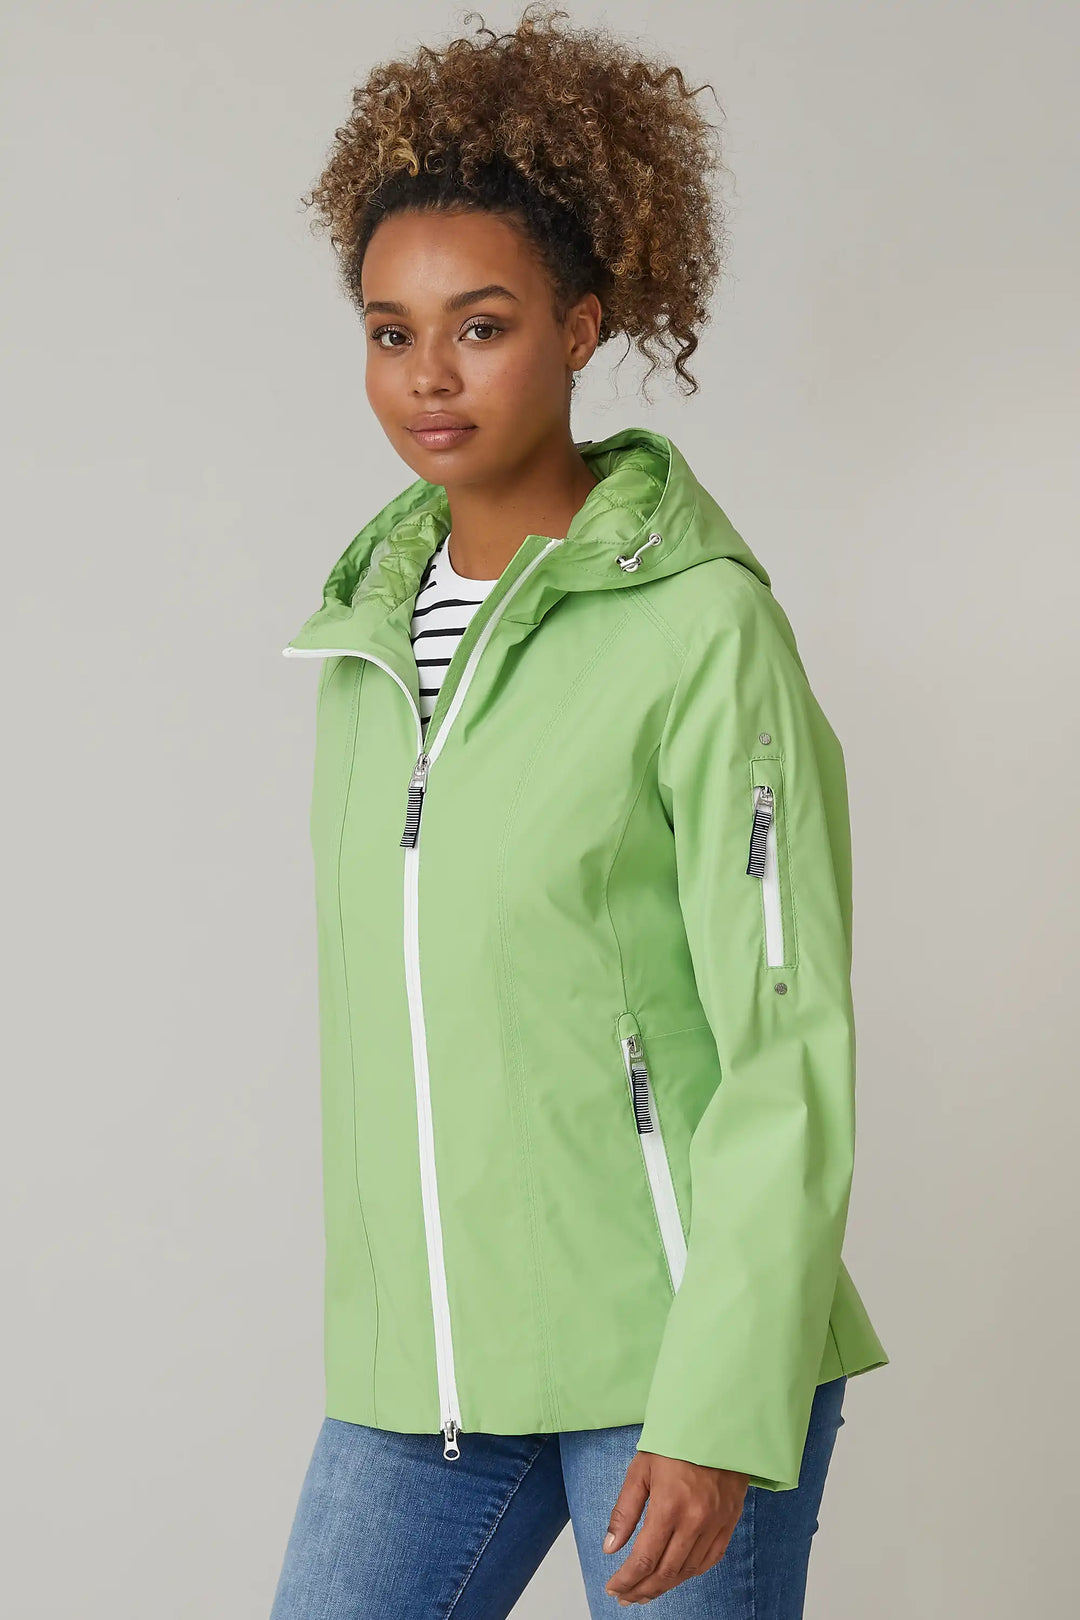 Model in a lime green jacket with hood and zippered pockets, over a striped top and blue jeans, style 0124-2494-88-49